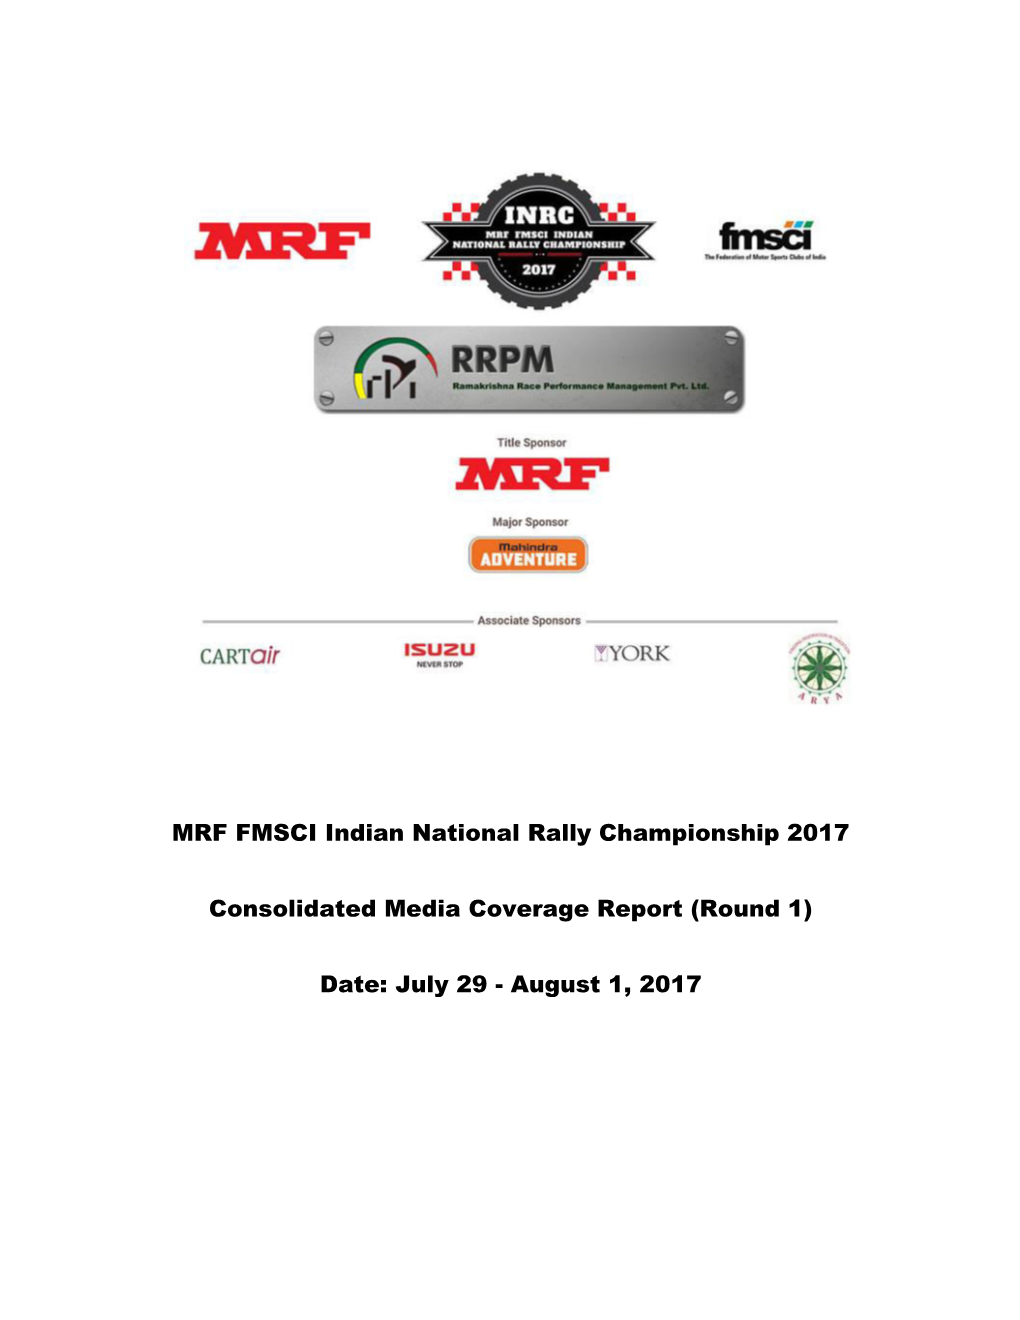 MRF FMSCI Indian National Rally Championship 2017 Consolidated